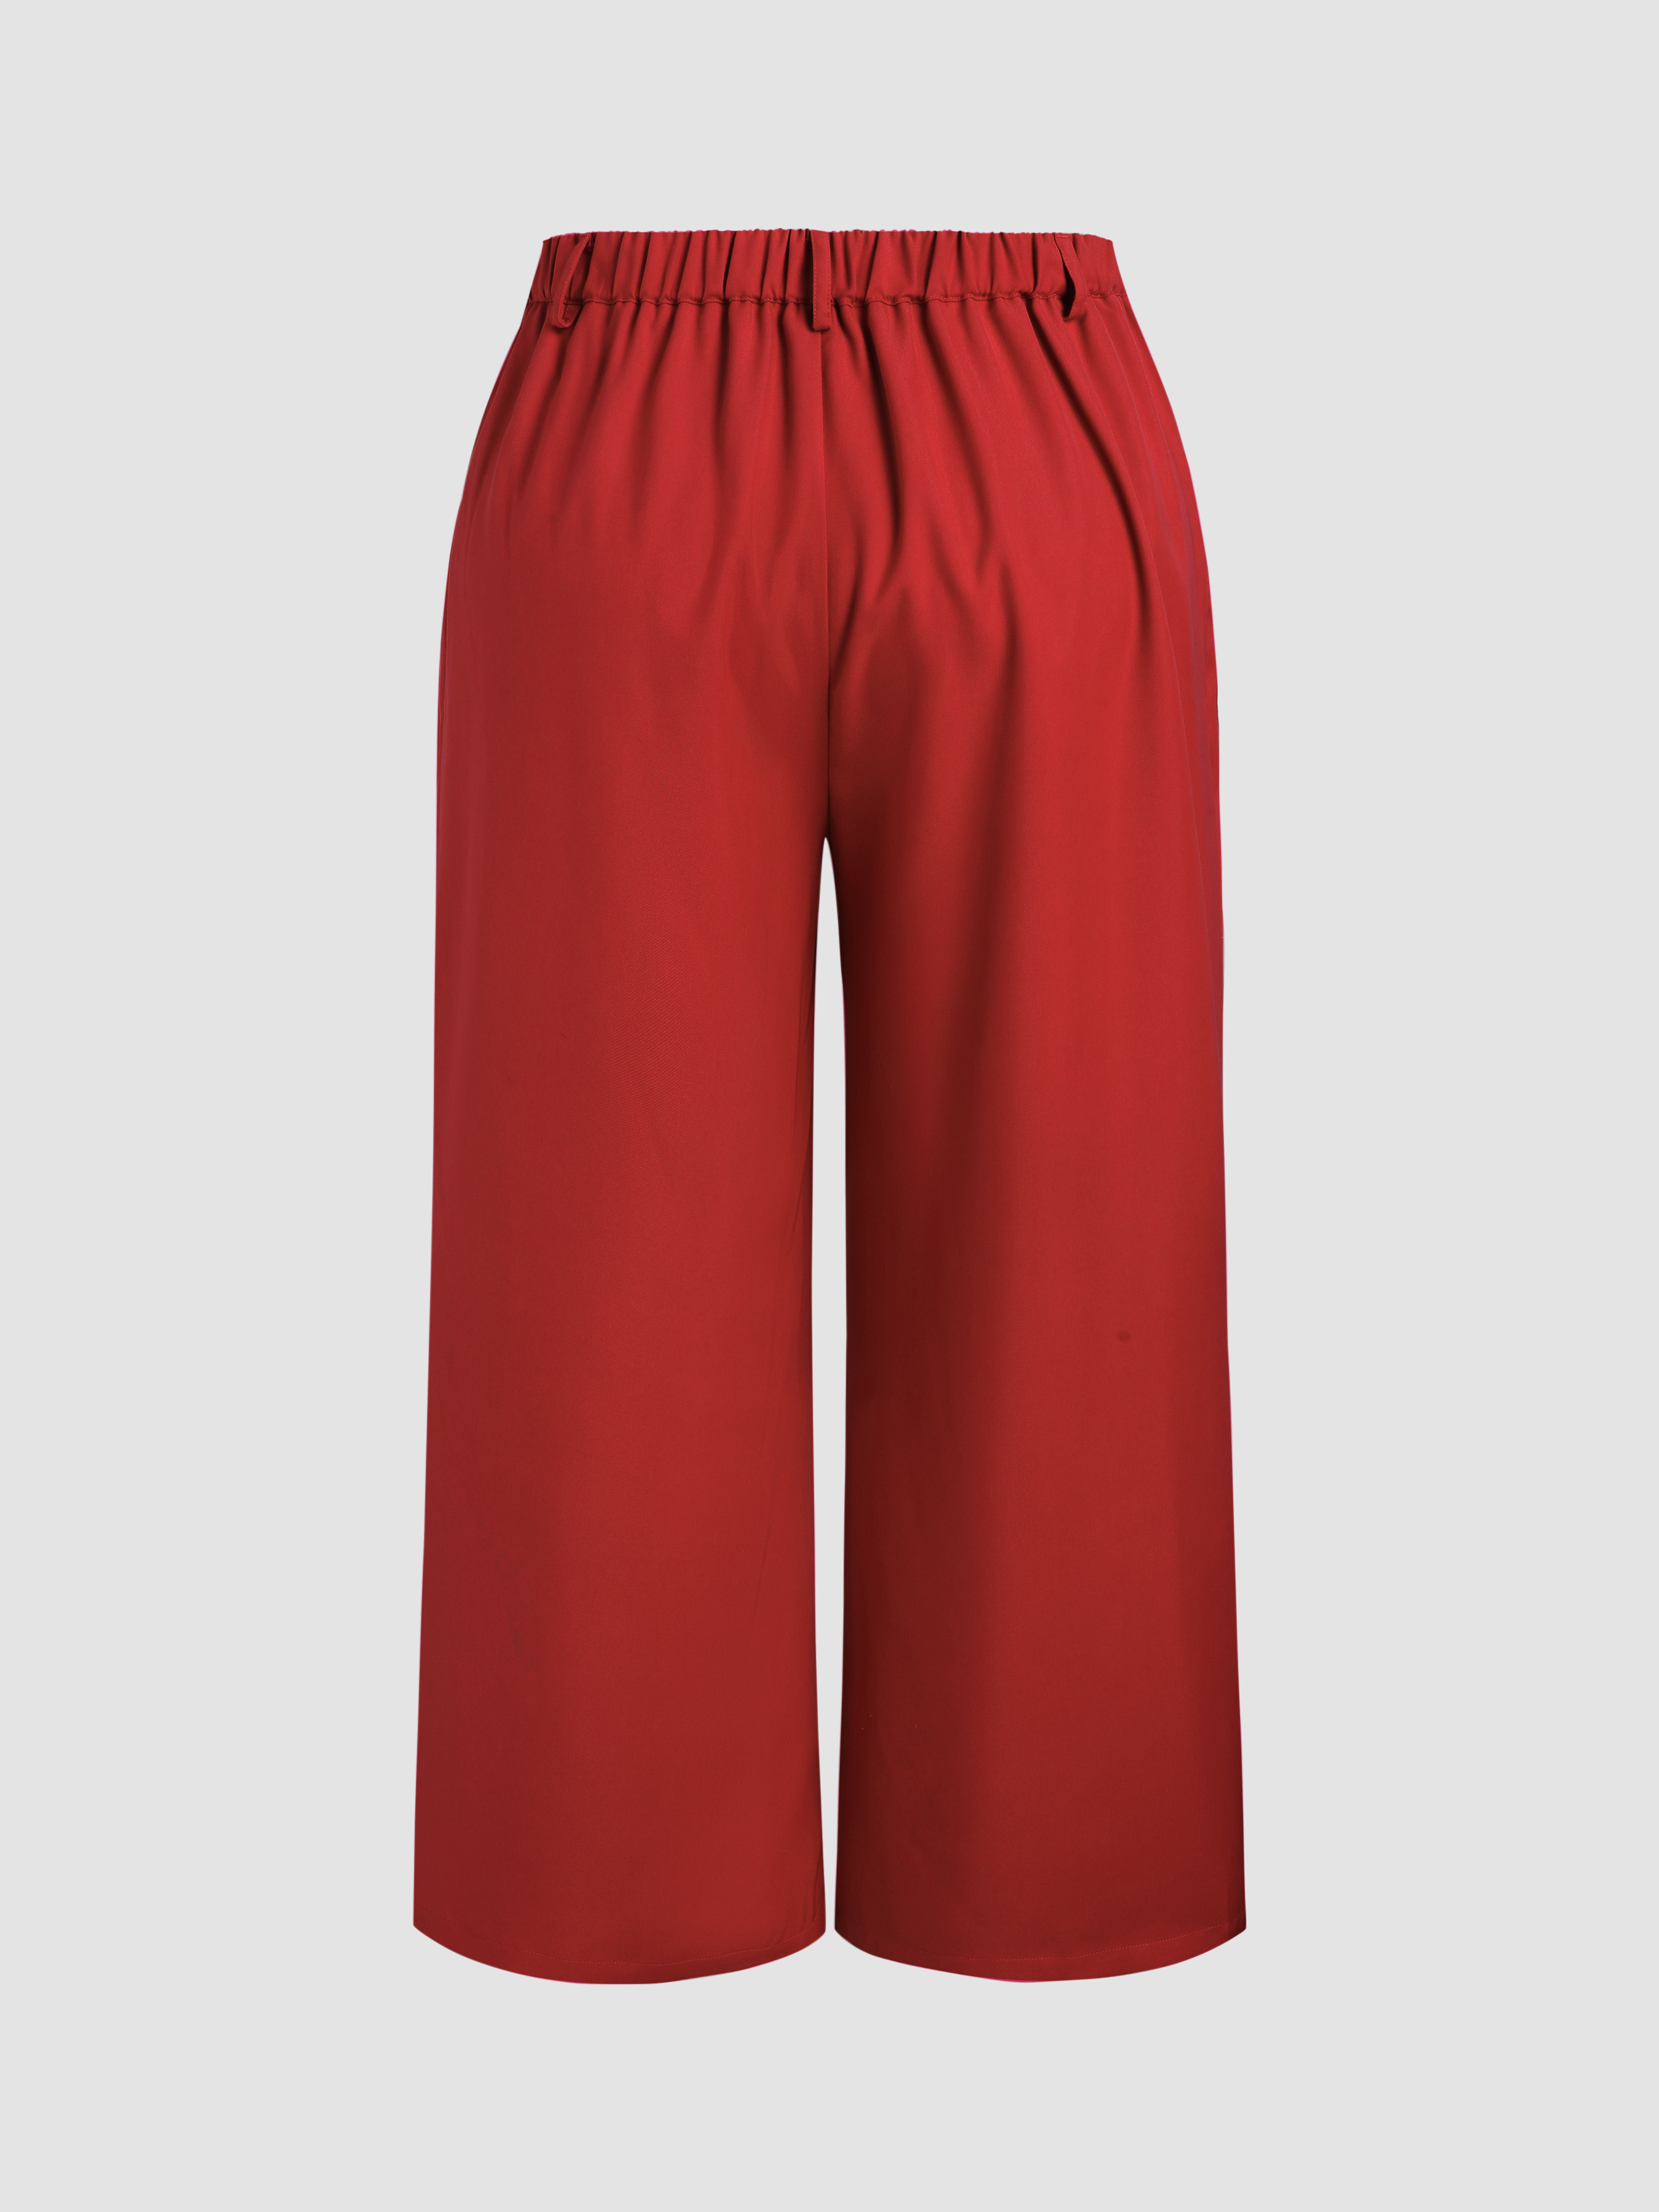 JWZUY Womens Wide Leg Pants Straight Trouser Elastic High Waist Full Pants  Plus Size Solid Pleated Pant Culottes Pant with Pocket Red XL